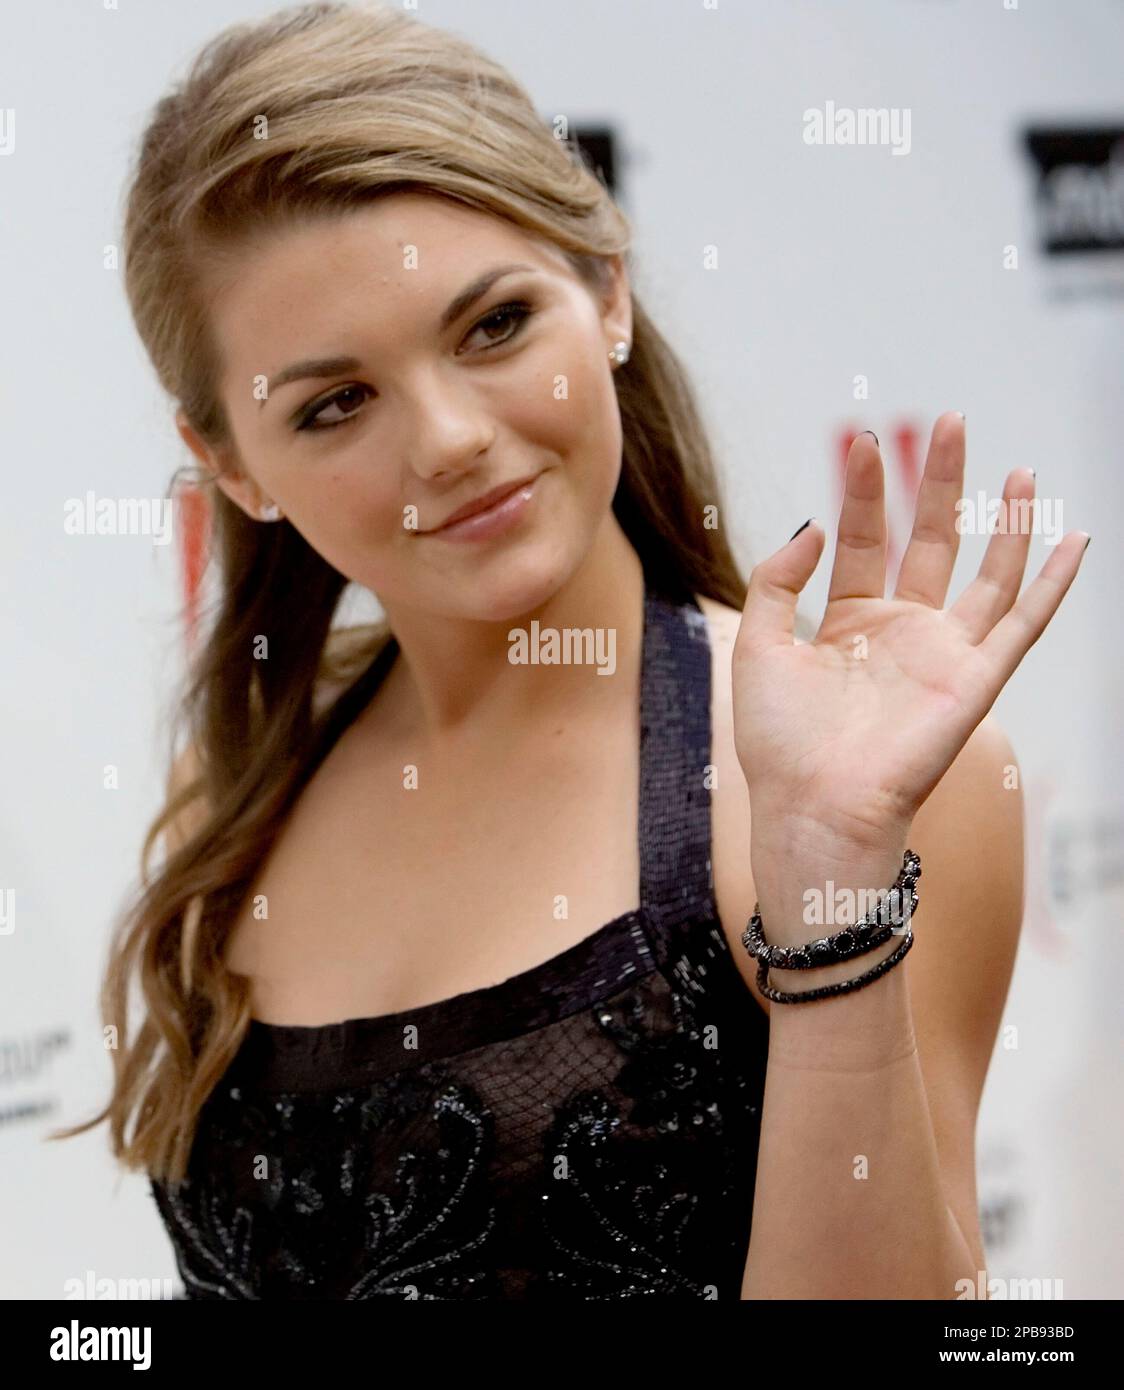 ** FILE ** The fate of Bree, the Web's "LonelyGirl15" star portrayed by Jessica Lee Rose of New Zealand, seen here in a file photo taken in New York on June 5, 2007, will be revealed Friday, Aug. 3, 2007, when the successful and influential show ends its first season. (AP Photo/Stephen Chernin) Stockfoto